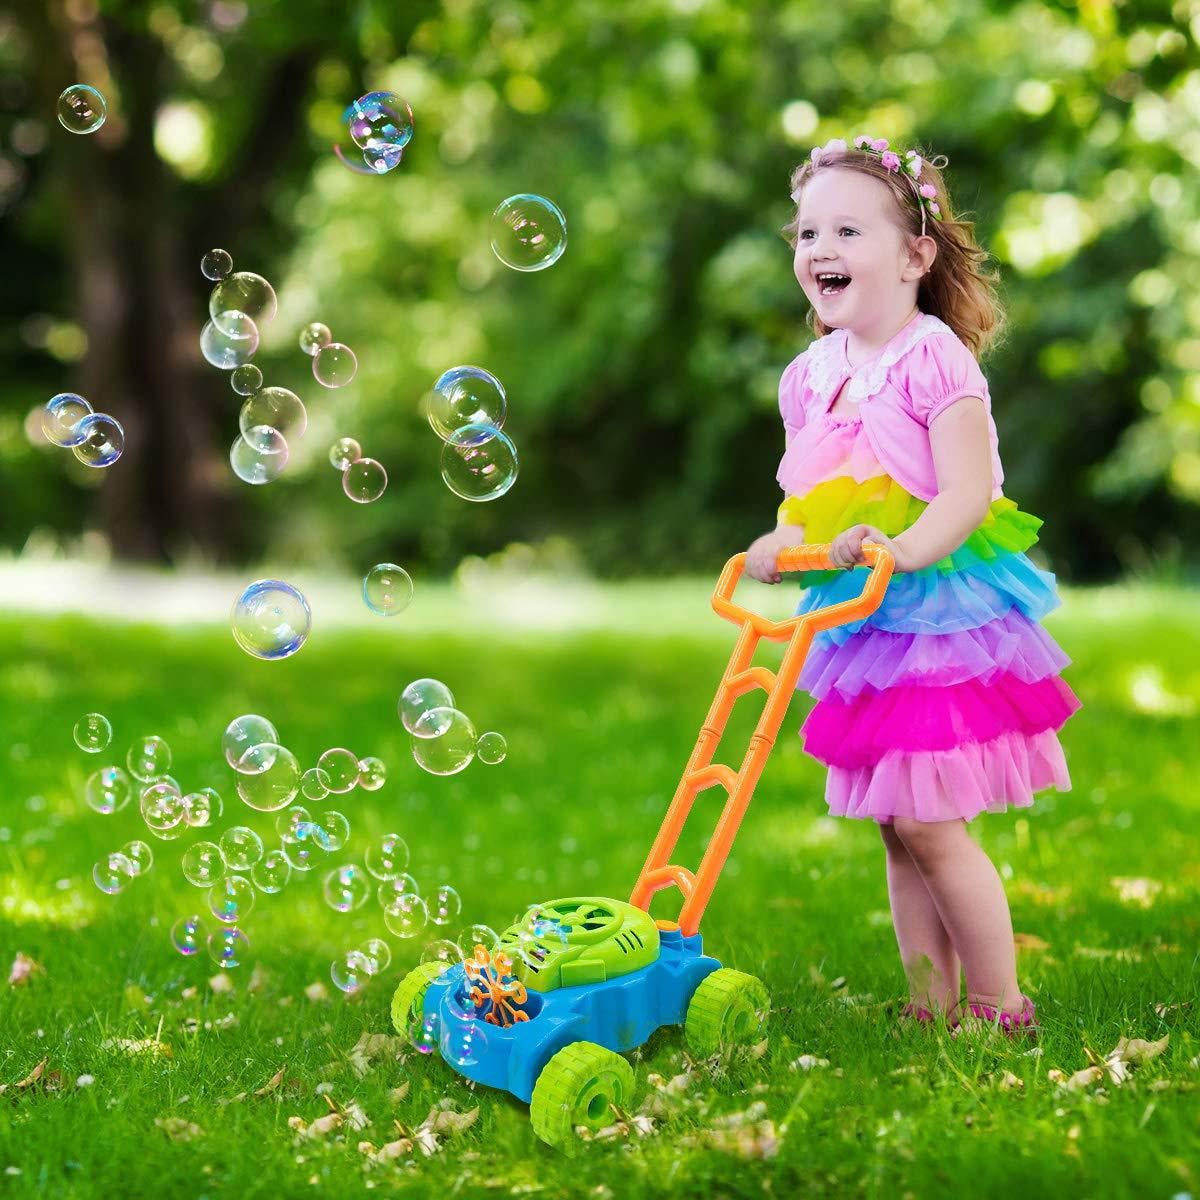 Kids Bubble Blower Machine with 4 Bubble Solutions 4 Bubble Sticks VRCLUB Bubble Lawn Mower for Toddlers Outdoor Push Game Toys Gifts for 2 3 4 5 6 7 Years Old Baby Boys Girls